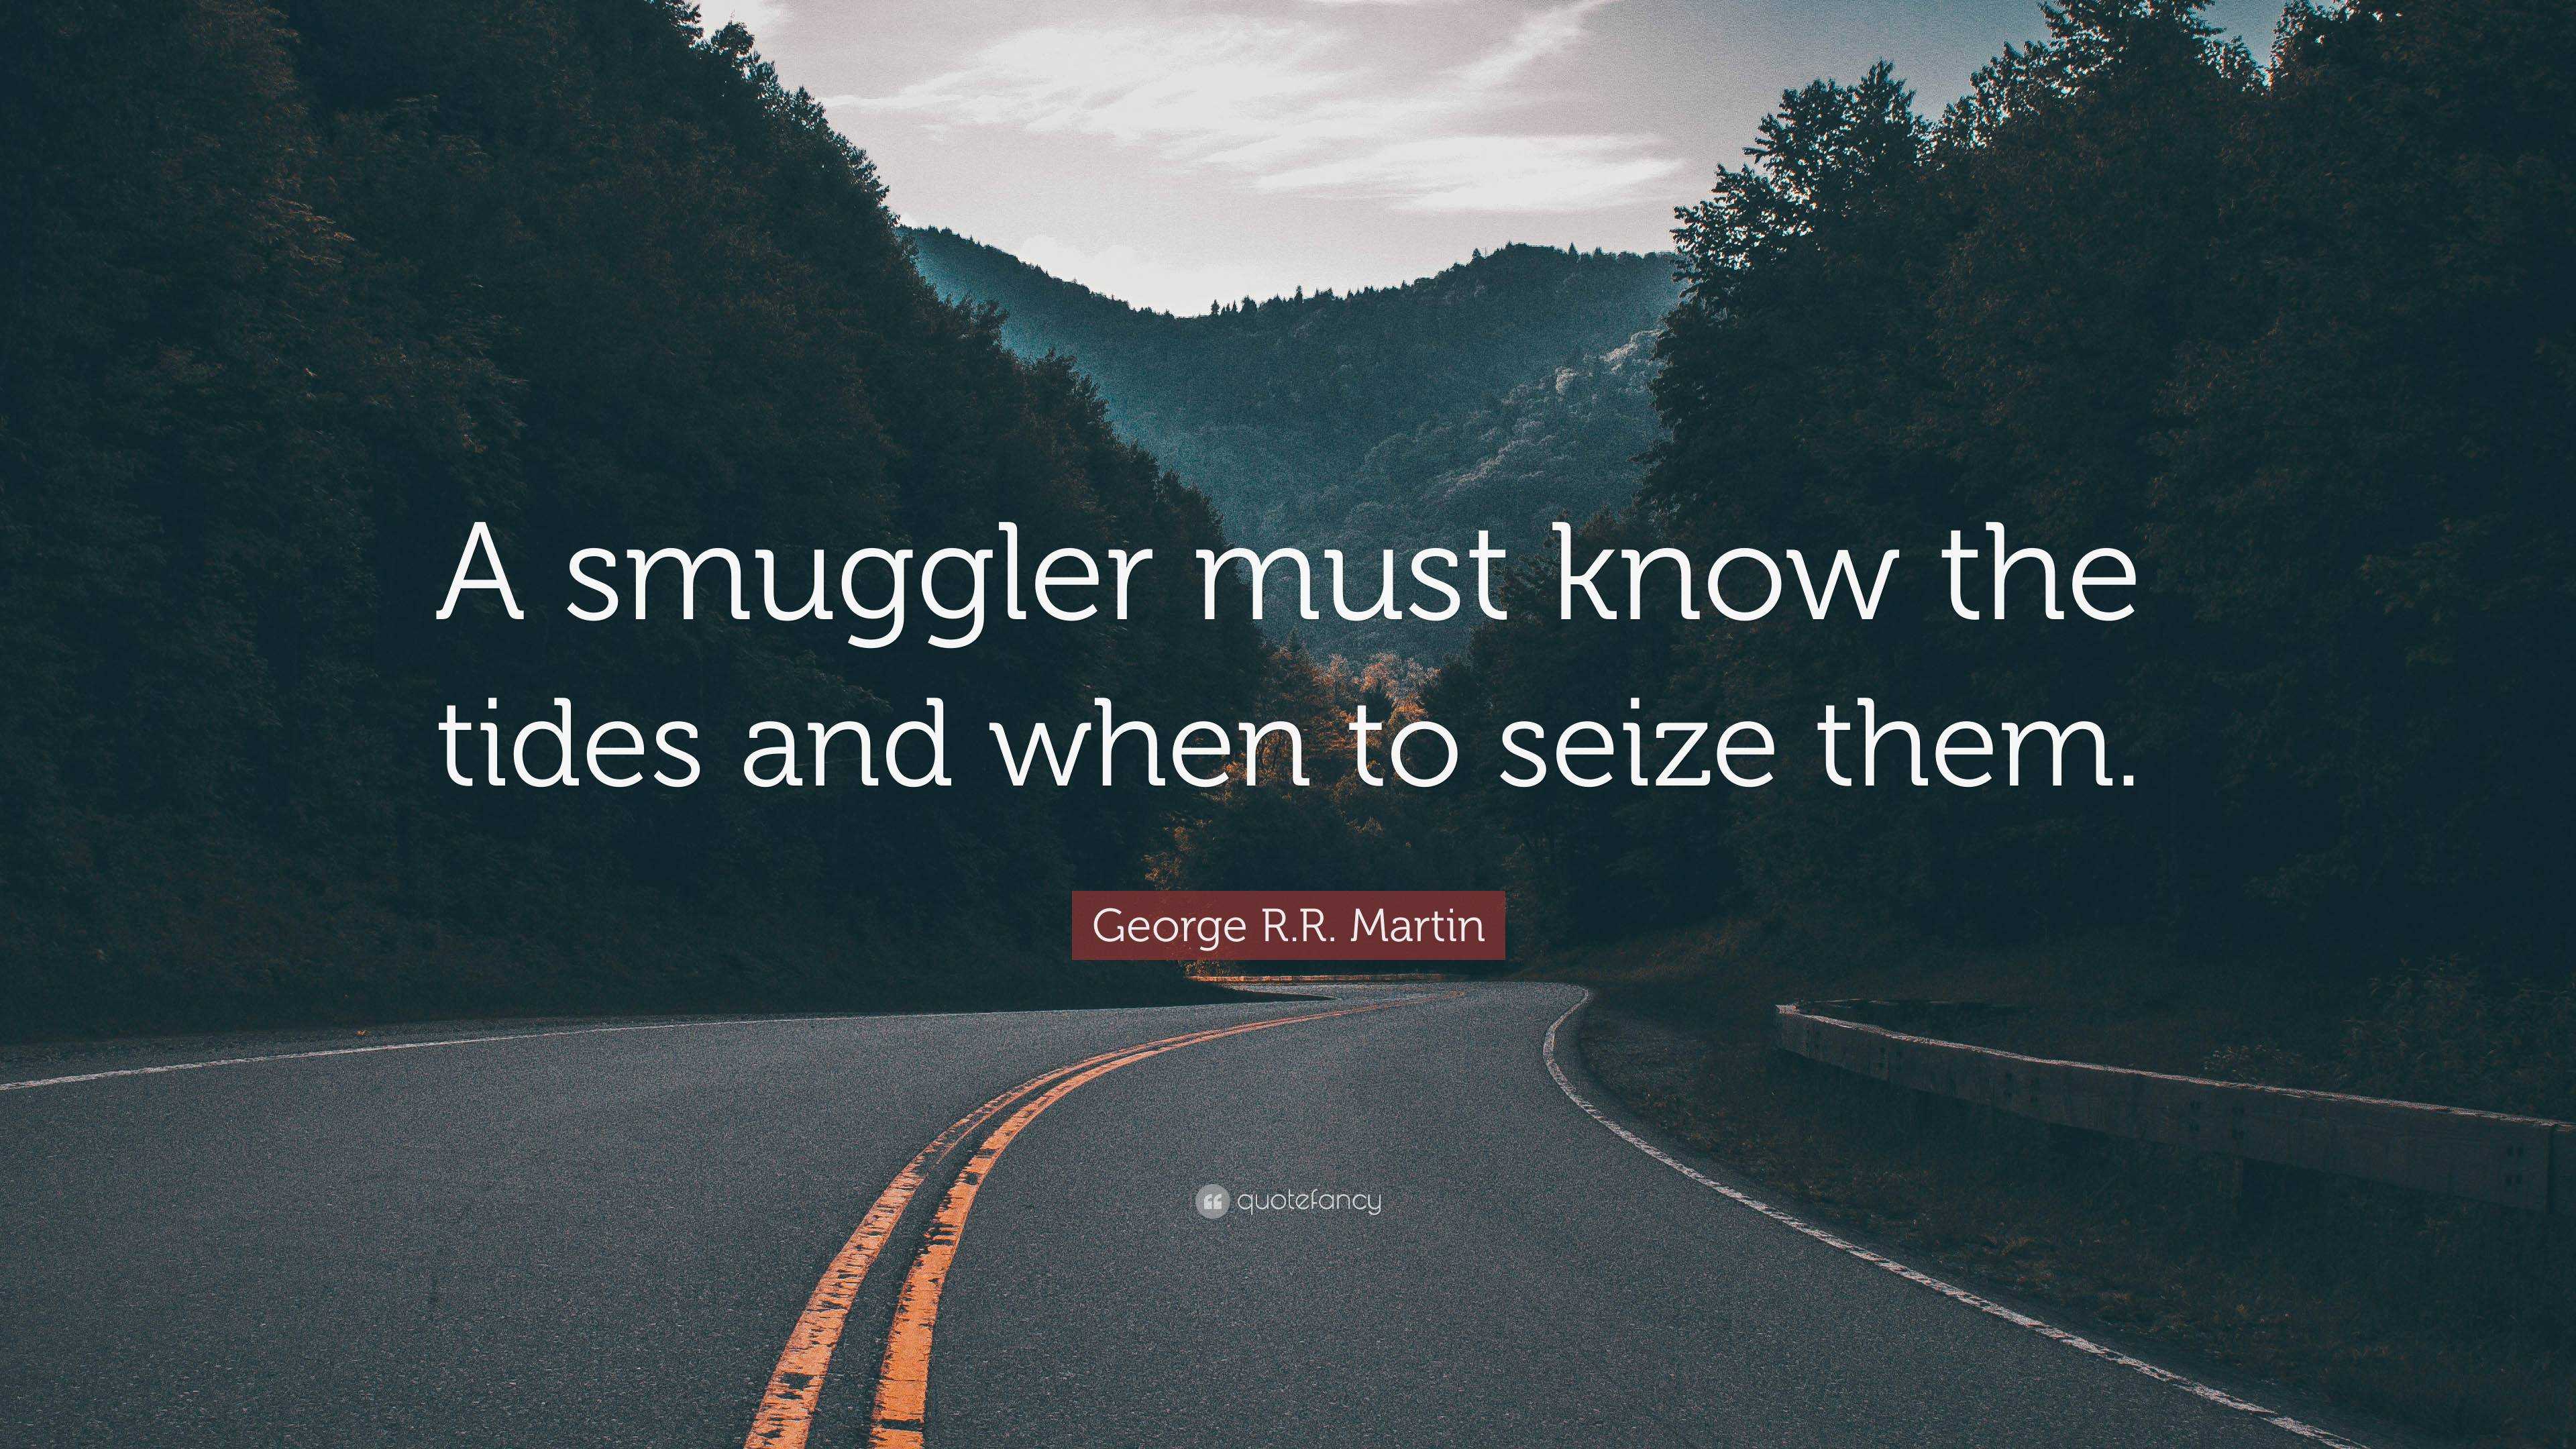 quotations on essay smuggling